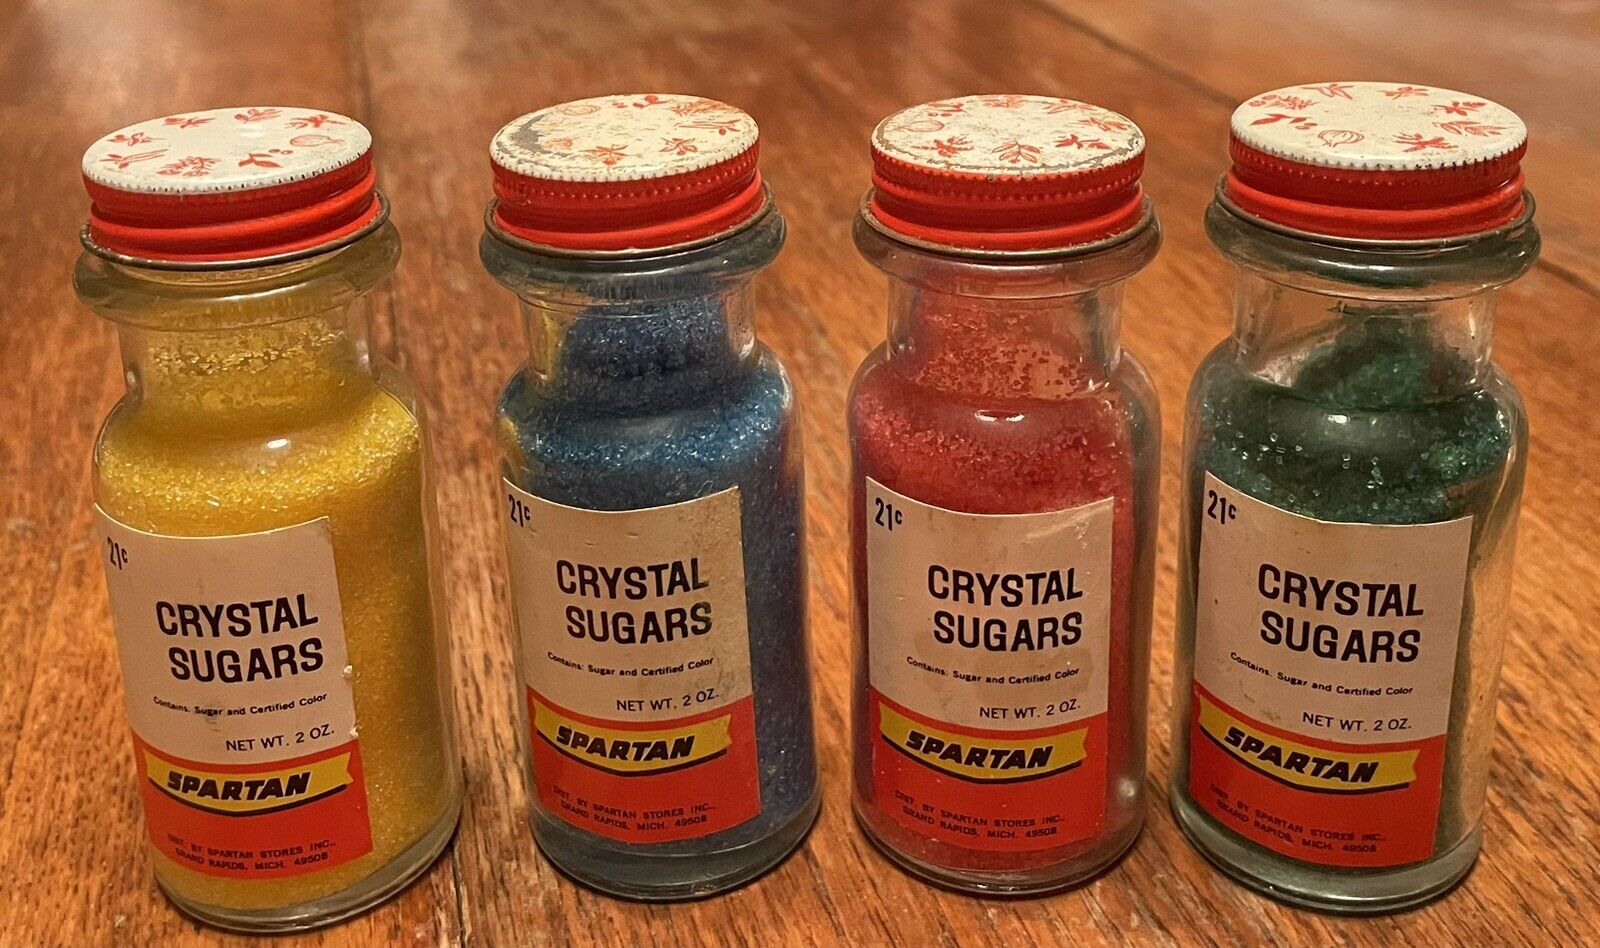 4 Vintage Spartan Brand Crystal Sugar Jars Nearly Full Glass Spice Containers